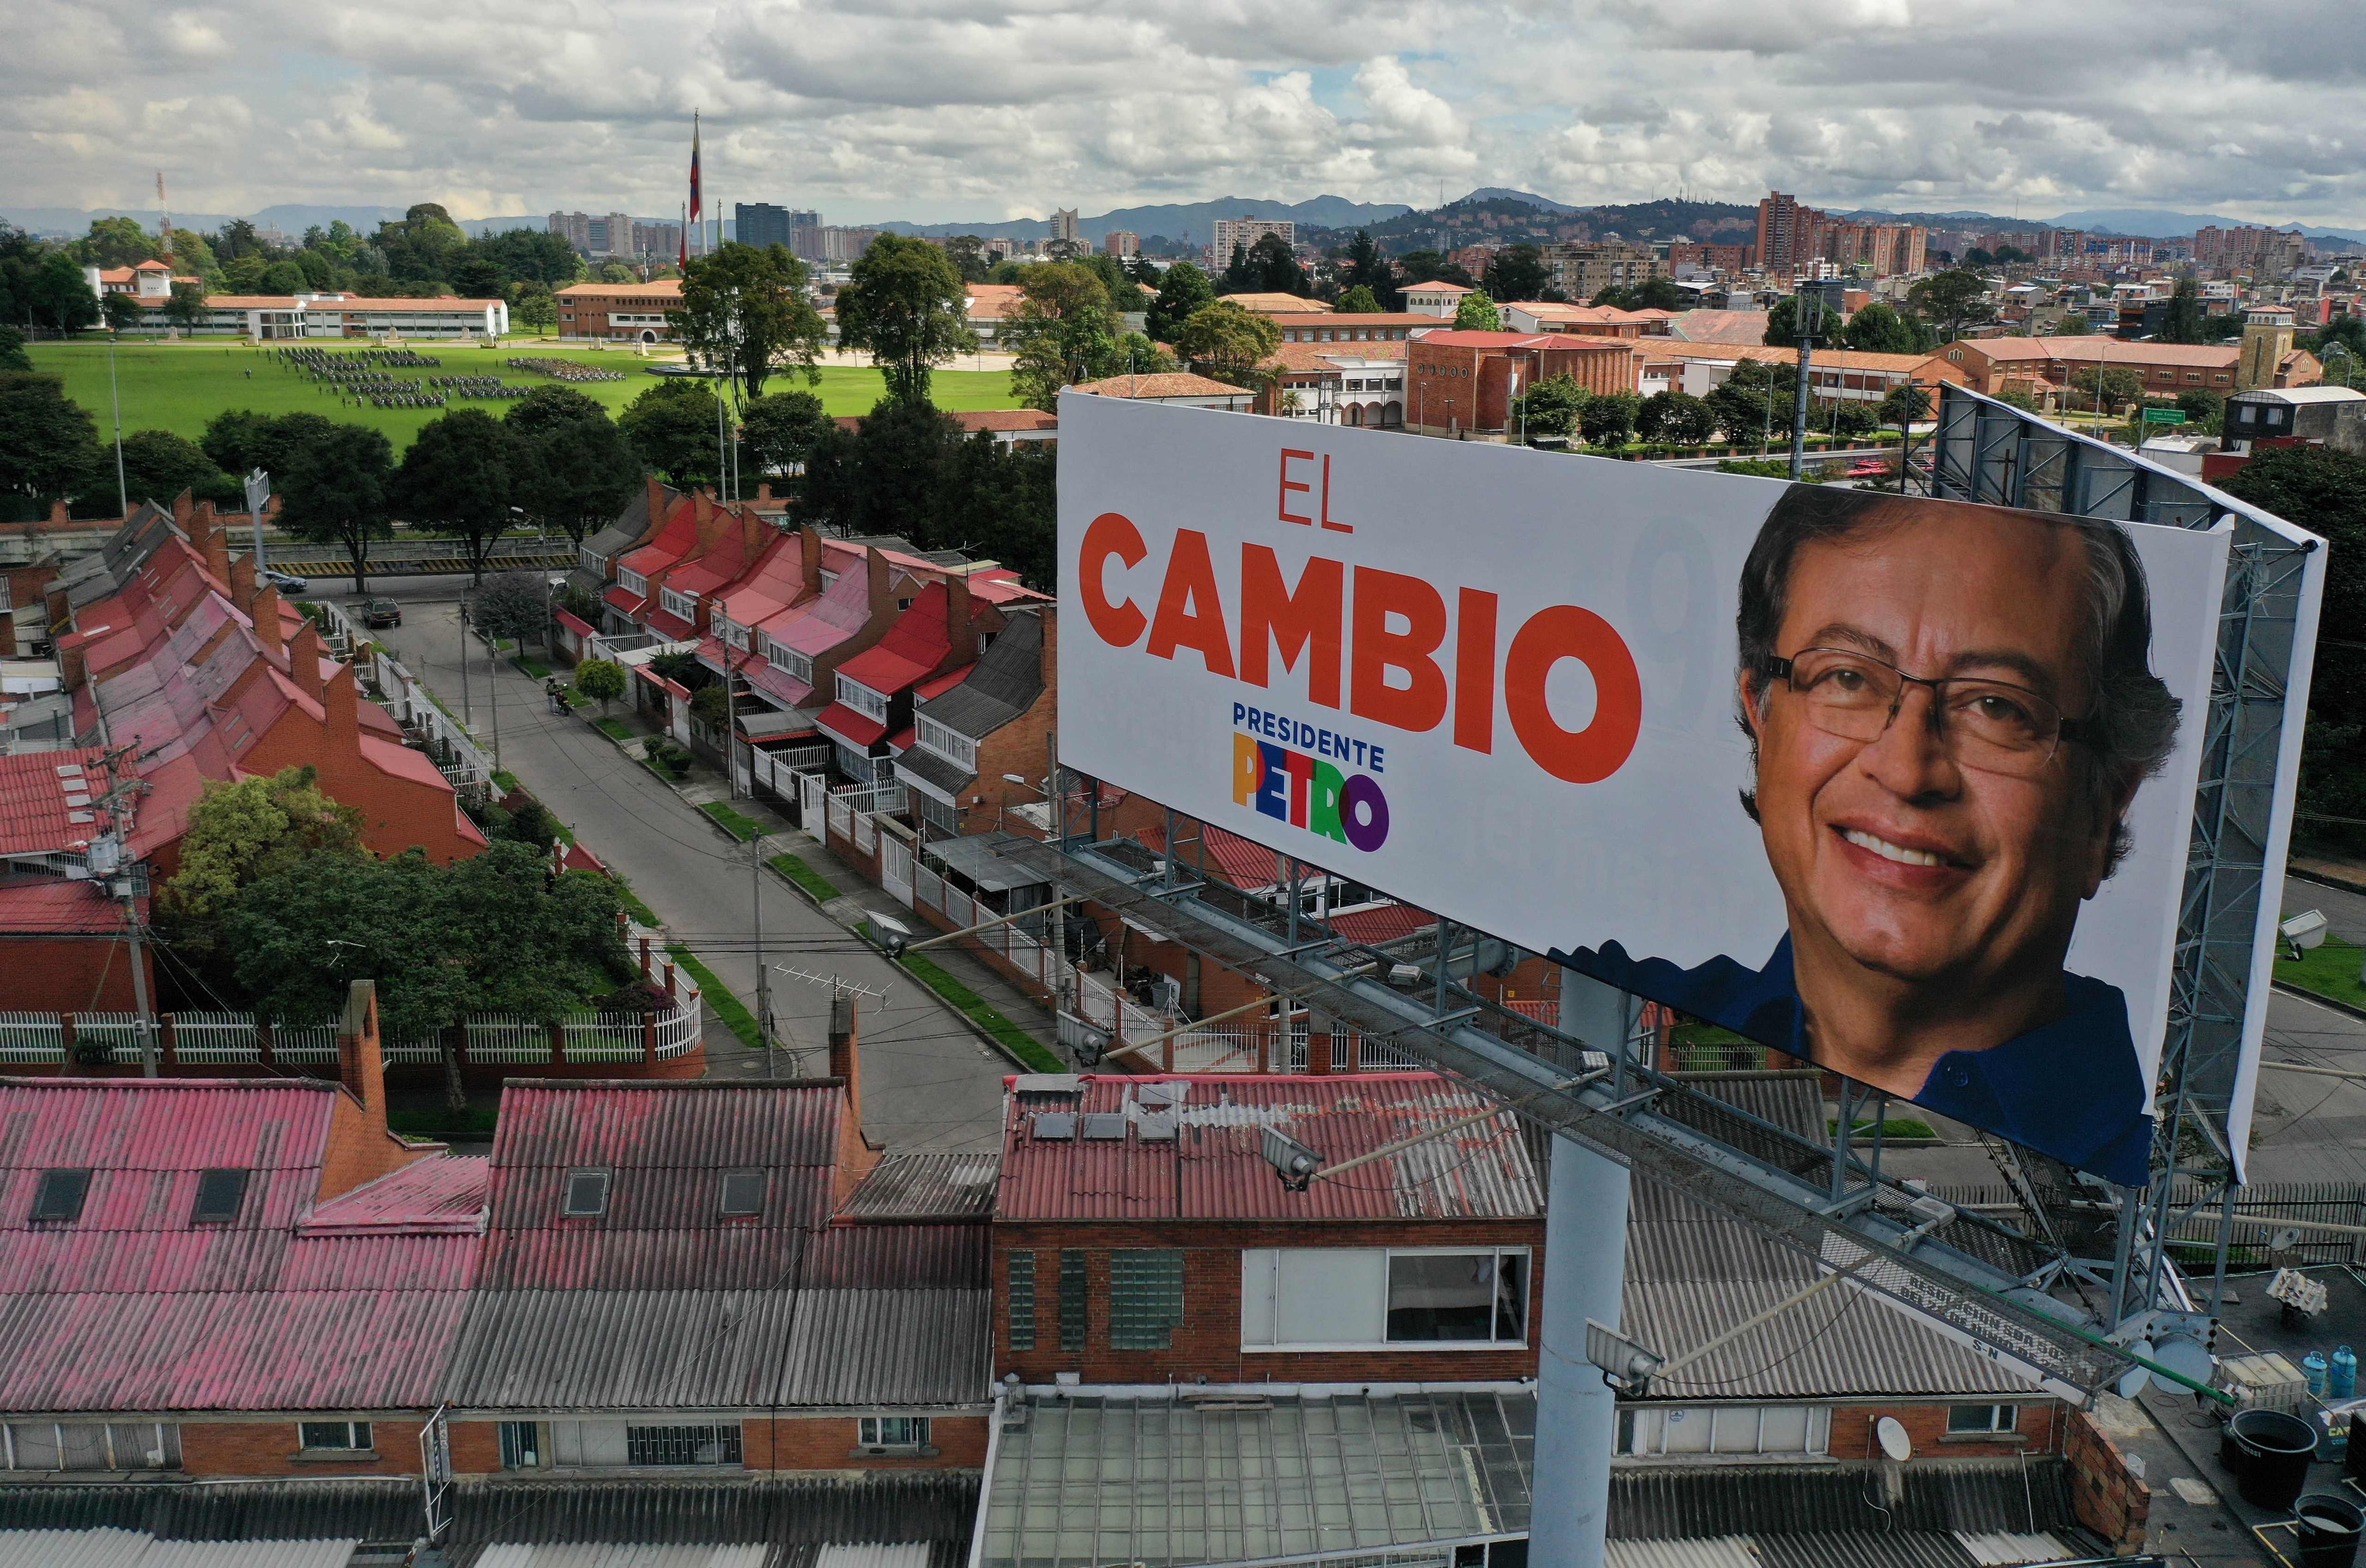 Gustavo Petro has presented himself as the candidate for change, but his slogan was affected by the emergence of Rodolfo Hernández, a populist outsider.  (Photo by Raul ARBOLEDA / AFP)